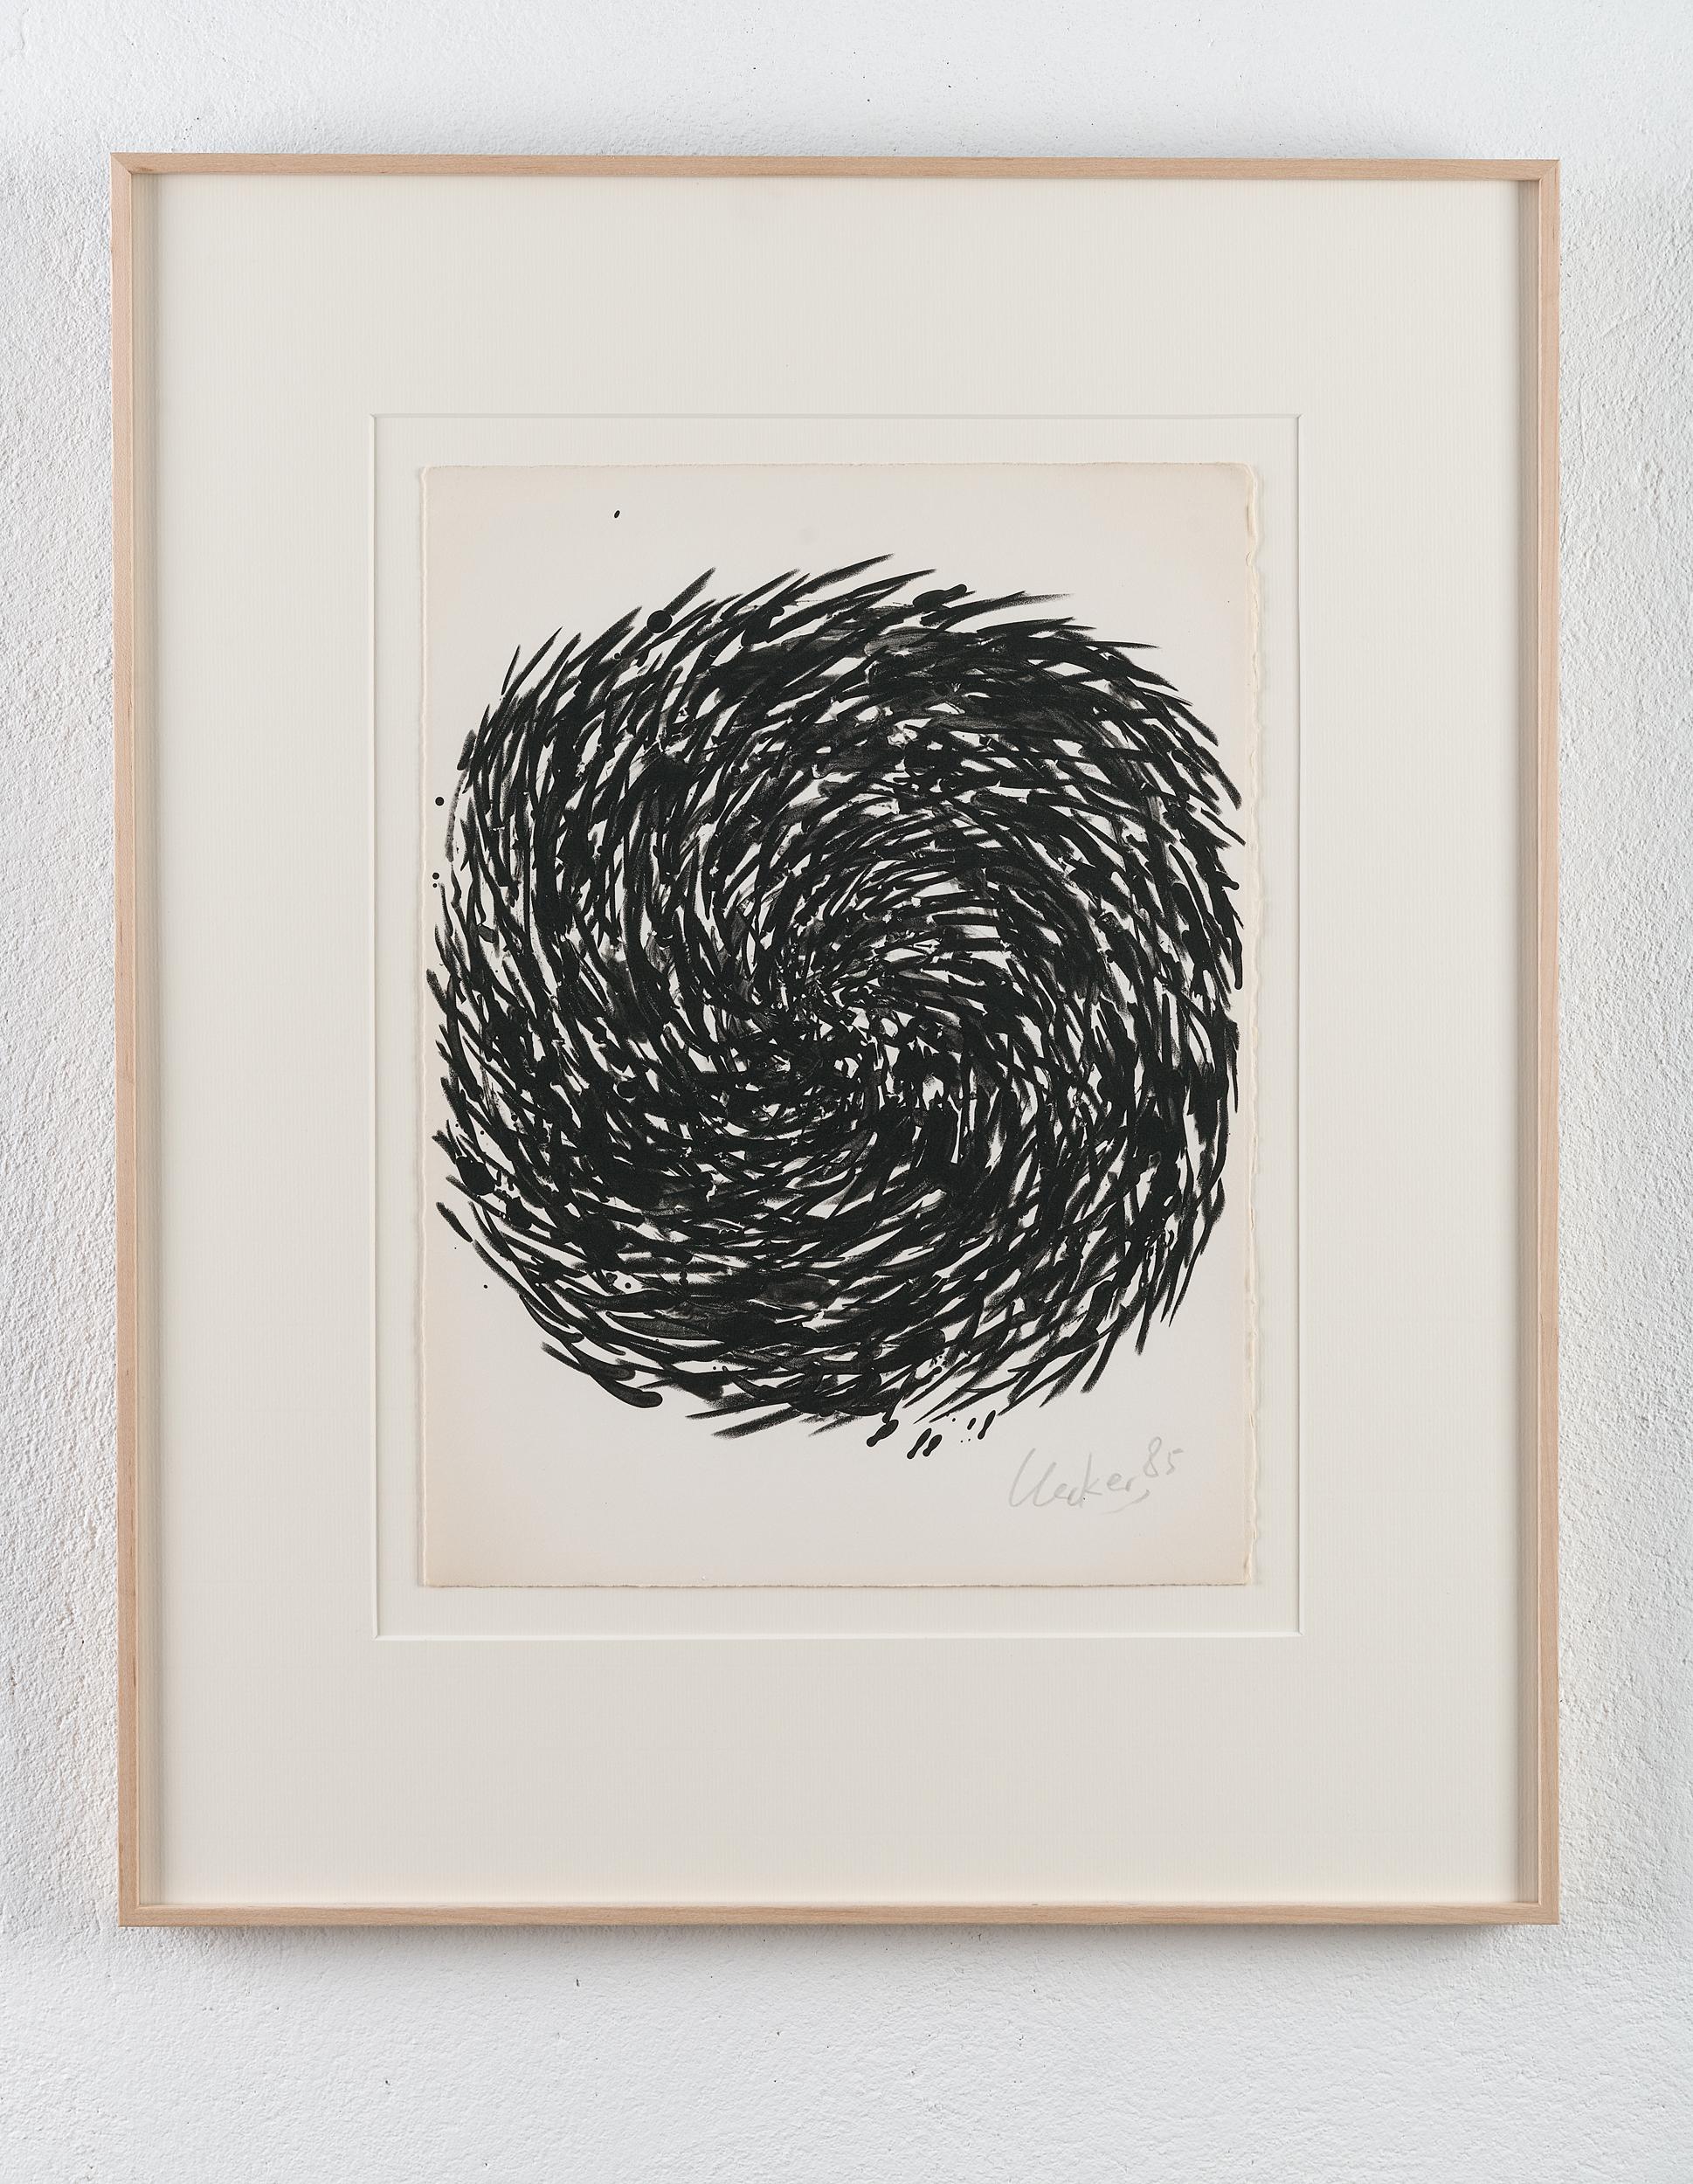 Minimalist Günther Uecker Spiral, Original Lithograph, Signed and Numbered